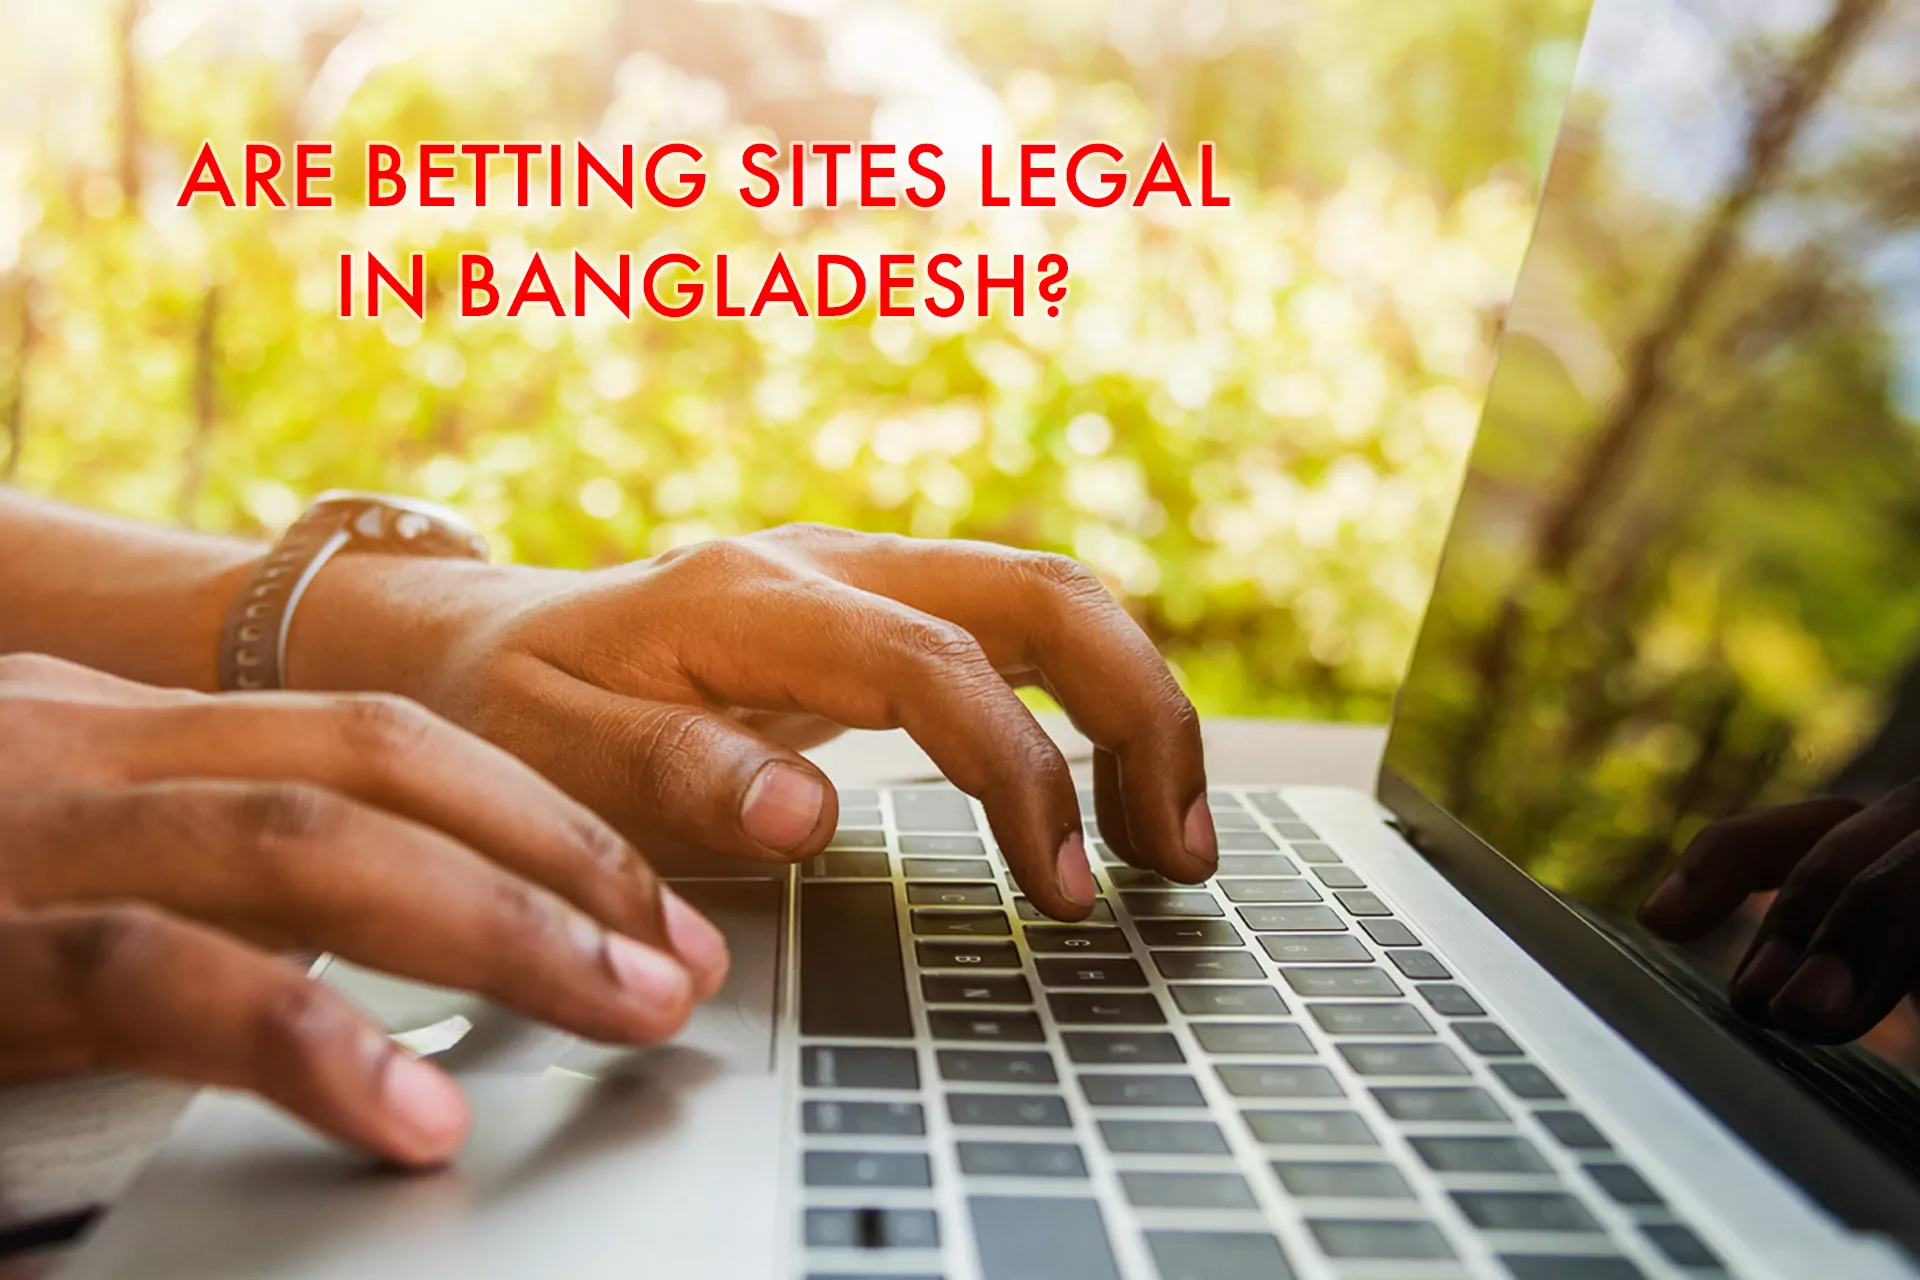 All of best betting sites in our list are absolutely legal in Bangladesh.